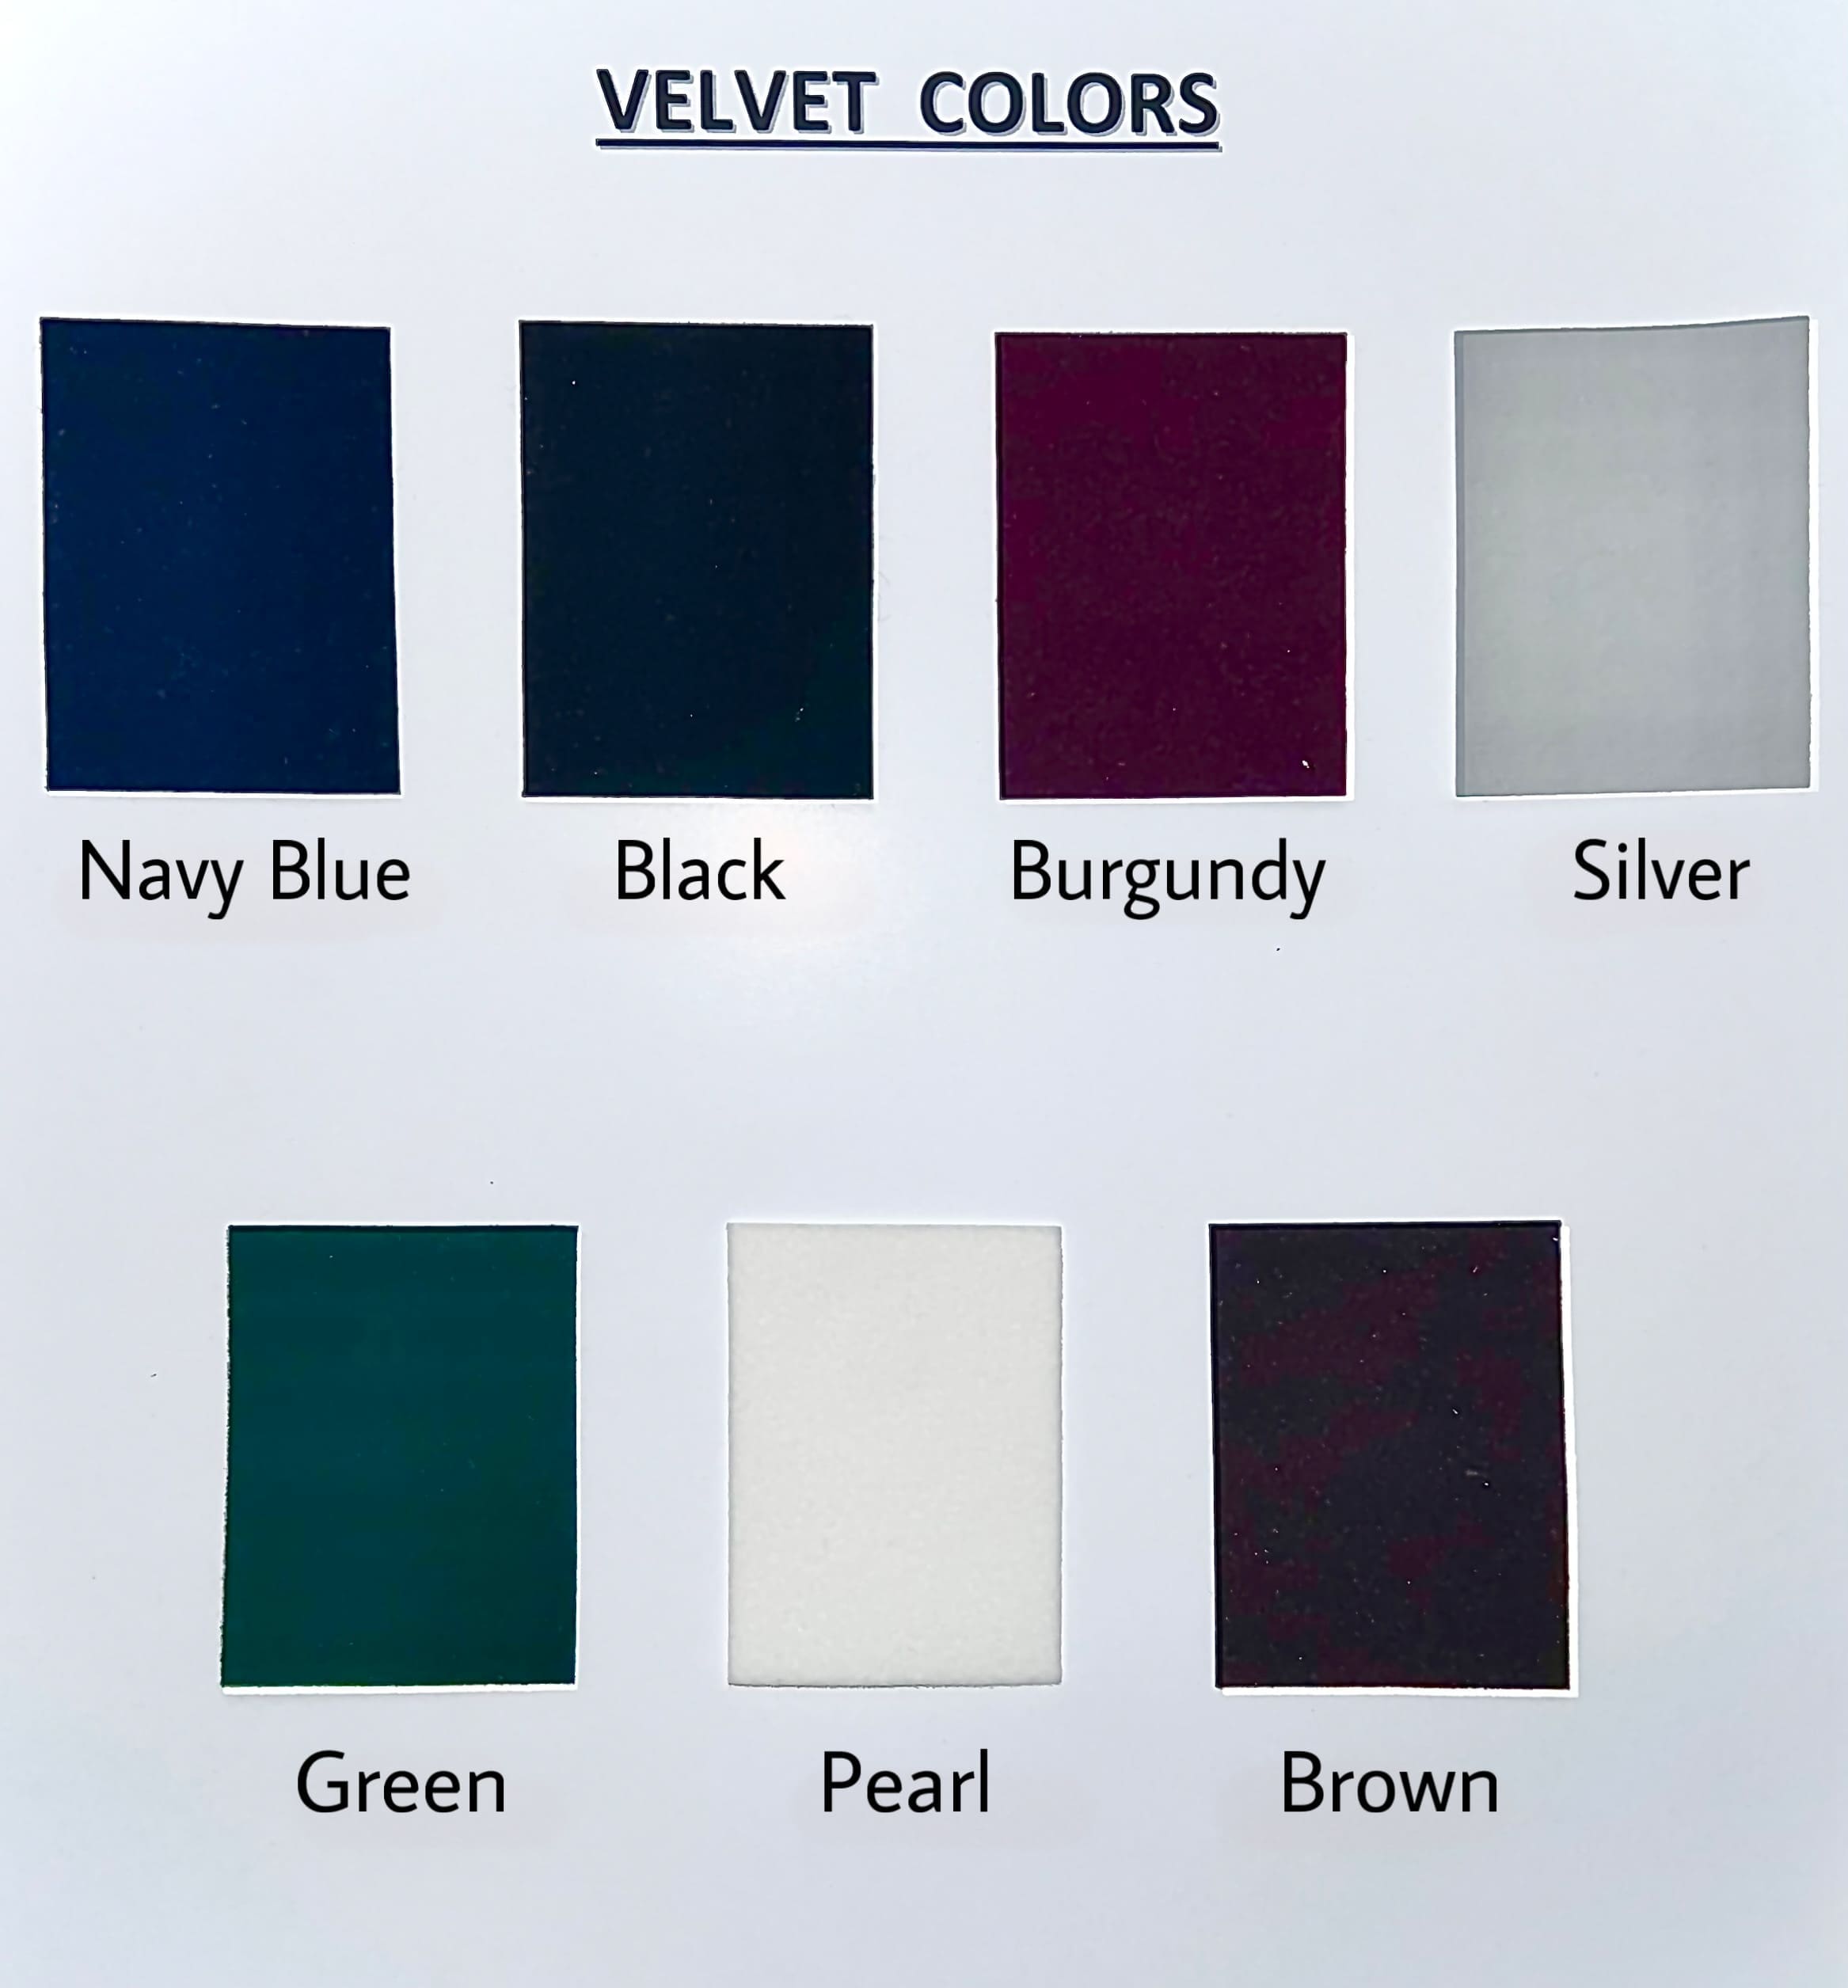 An image of available vervet colors including navy blue, black, burgundy, silver, green, pearl, and brown